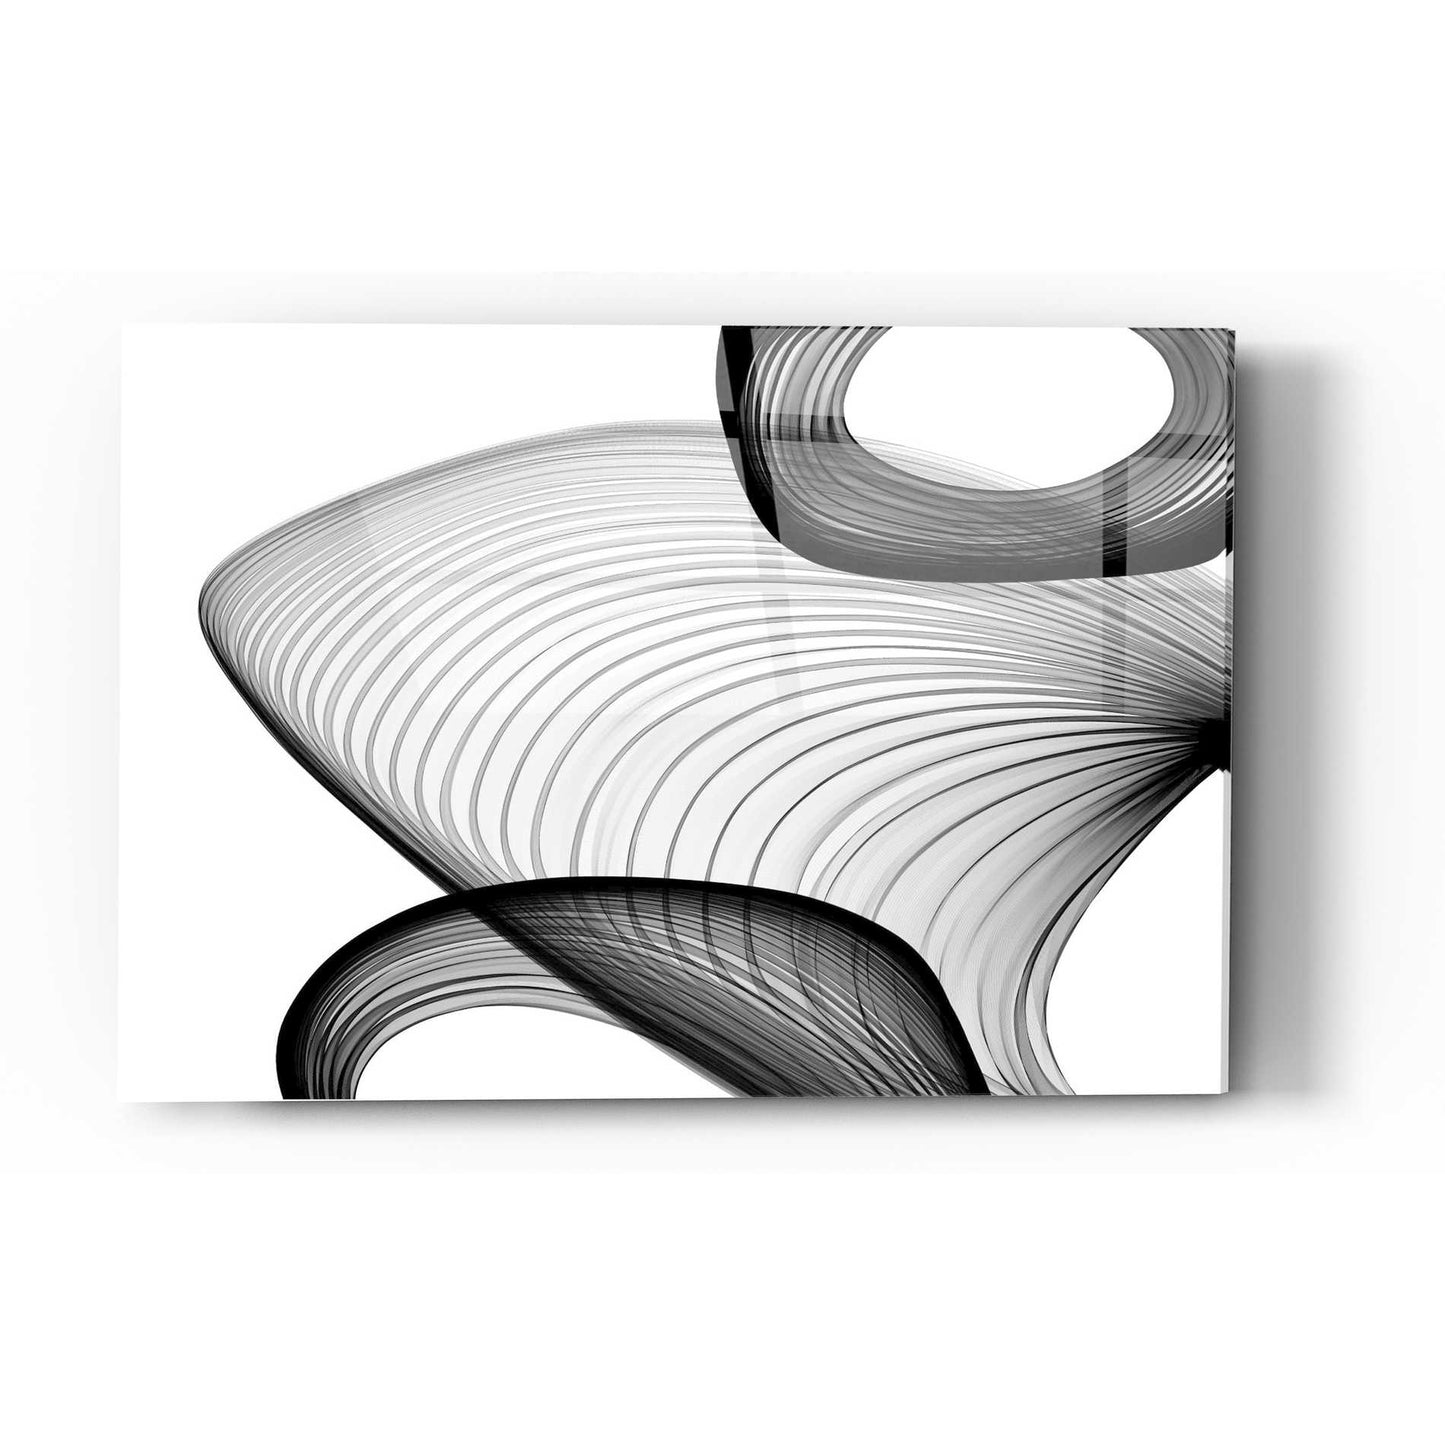 Epic Art 'Abstract Black and White 21-59' by Irena Orlov, Acrylic Glass Wall Art,12x16